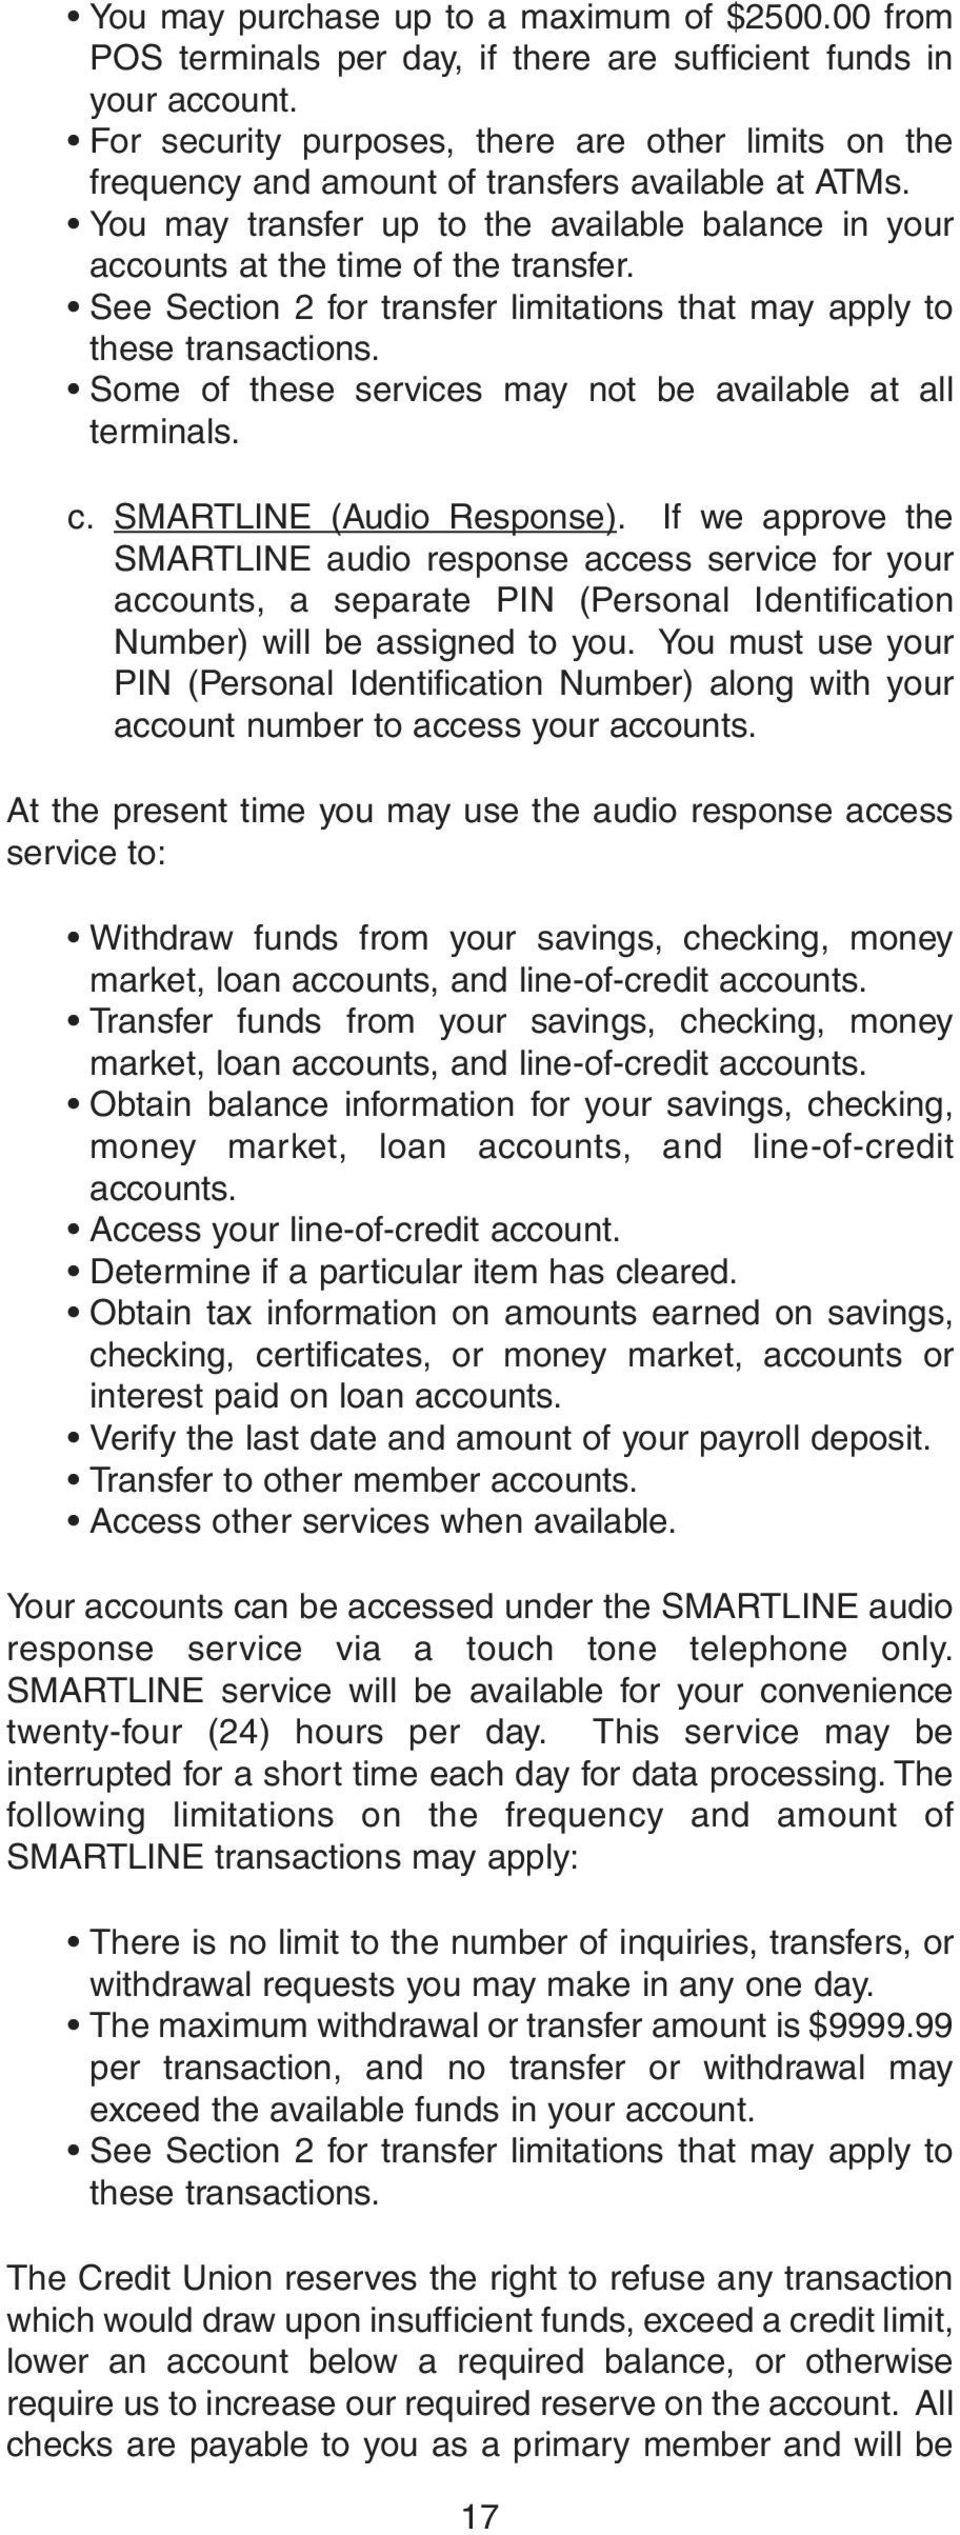 See Section 2 for transfer limitations that may apply to these transactions. Some of these services may not be available at all terminals. c. SMARTLINE (Audio Response).